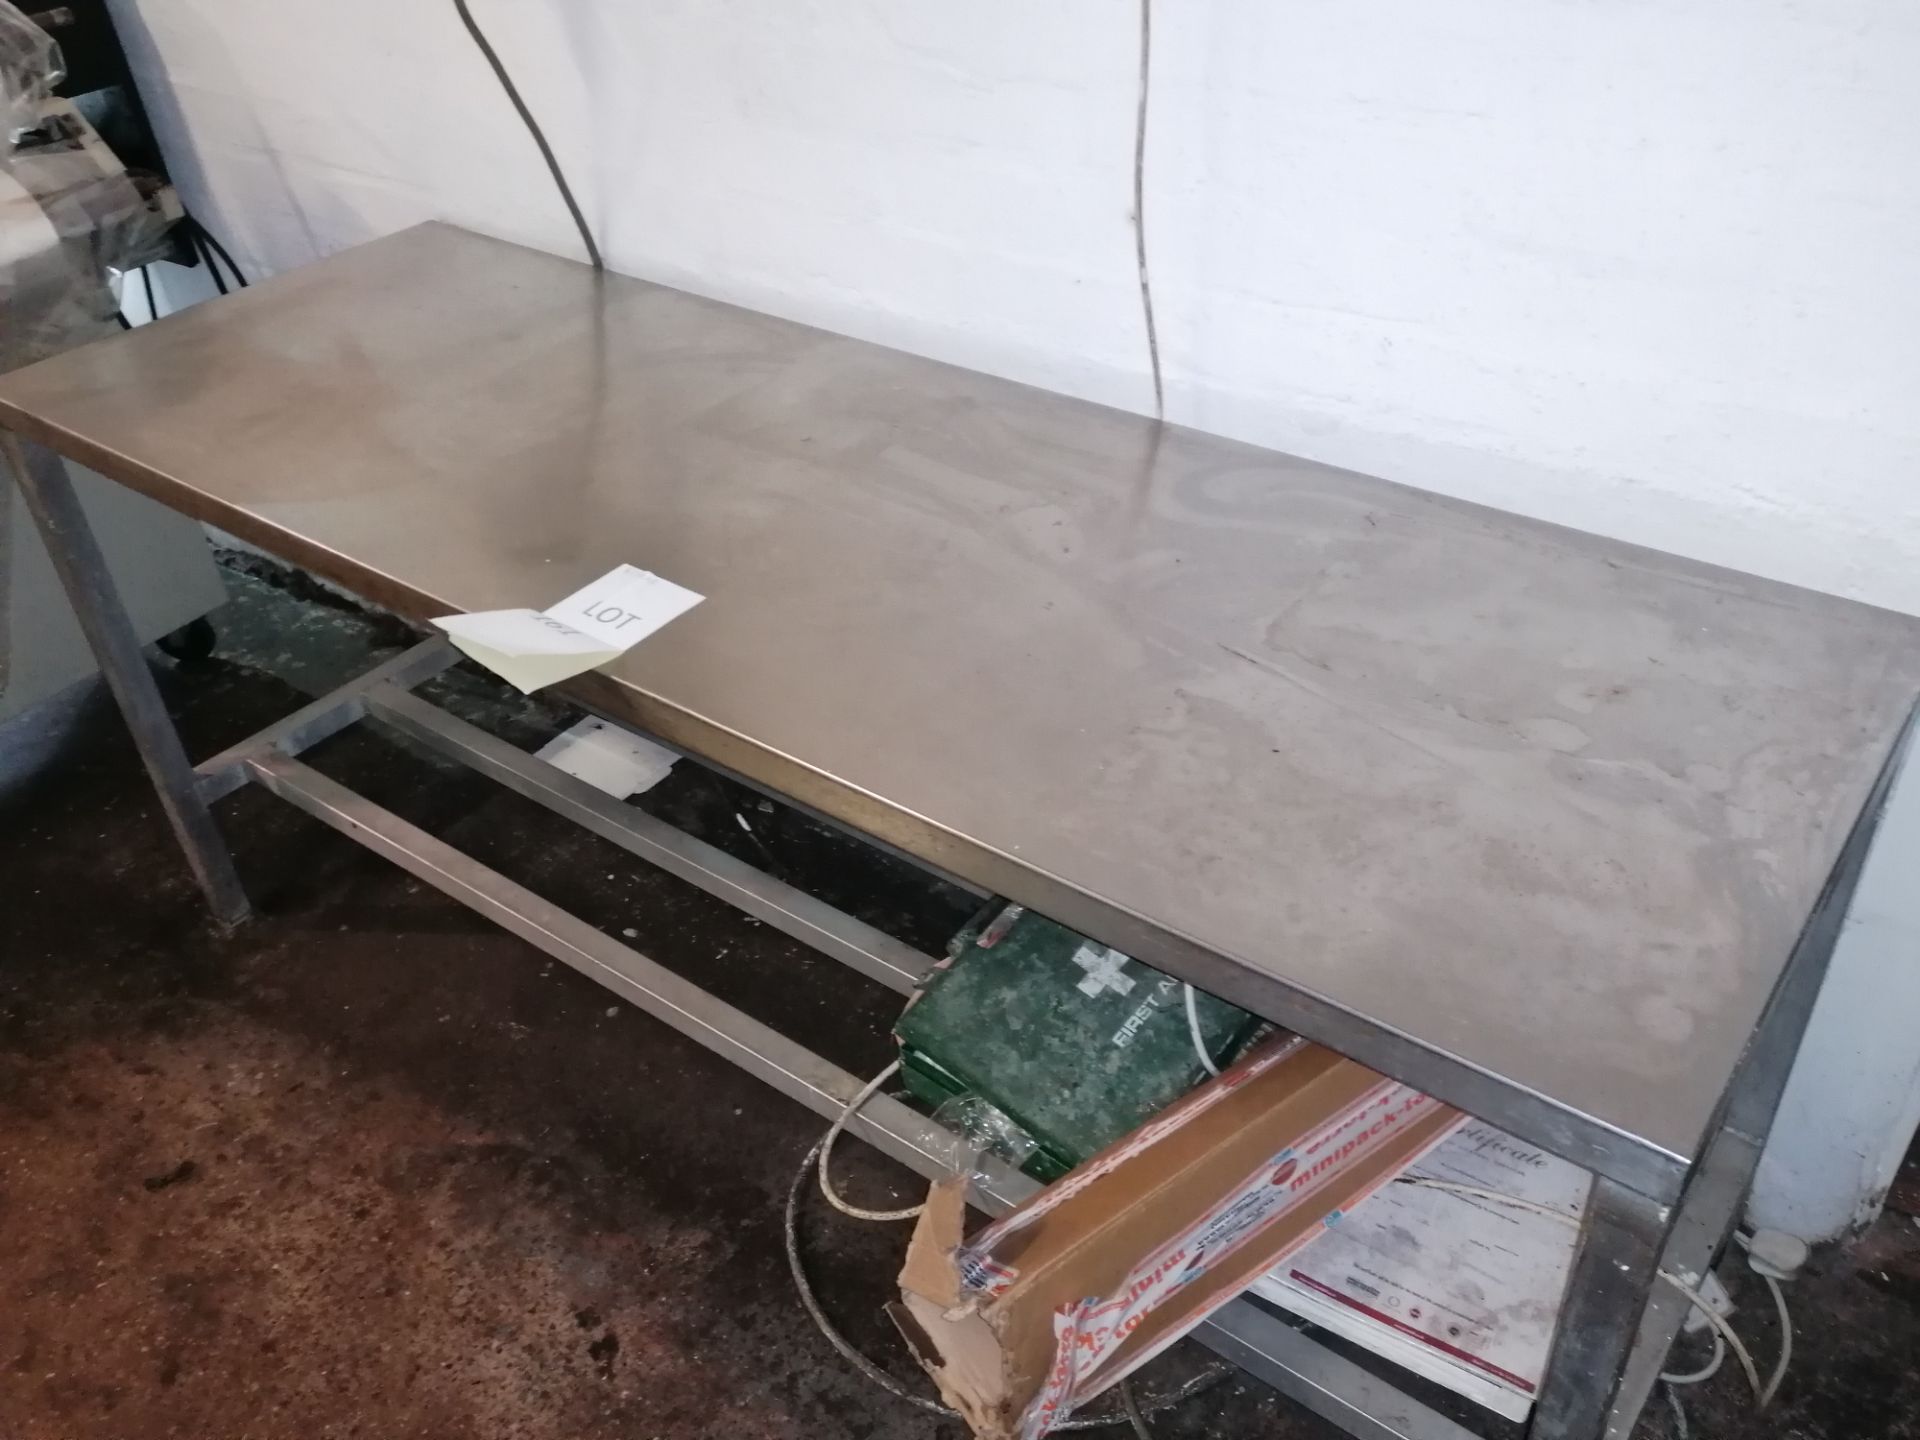 Stainless Steel Preperation Table With Aluminium Frame Length 182cm x Width 81cm x Height 79cm - Image 4 of 4